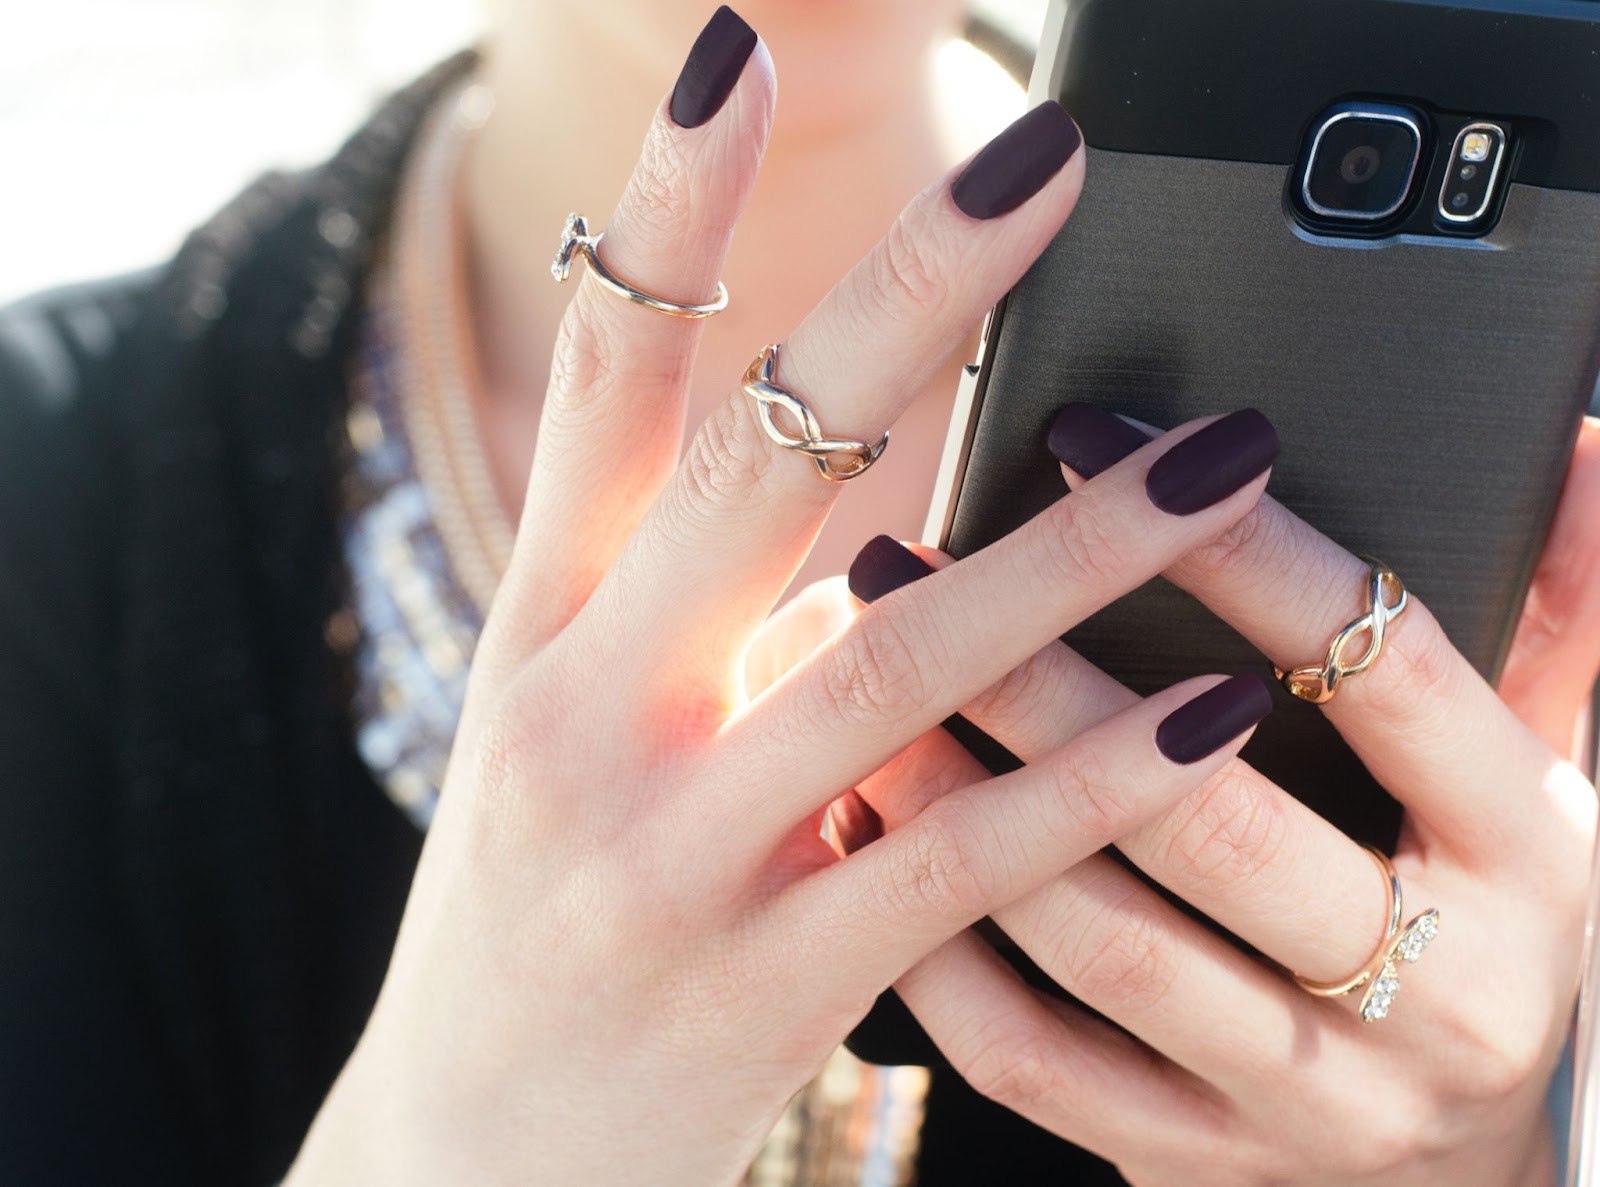 Hands with matte black holiday nails hold smart phone